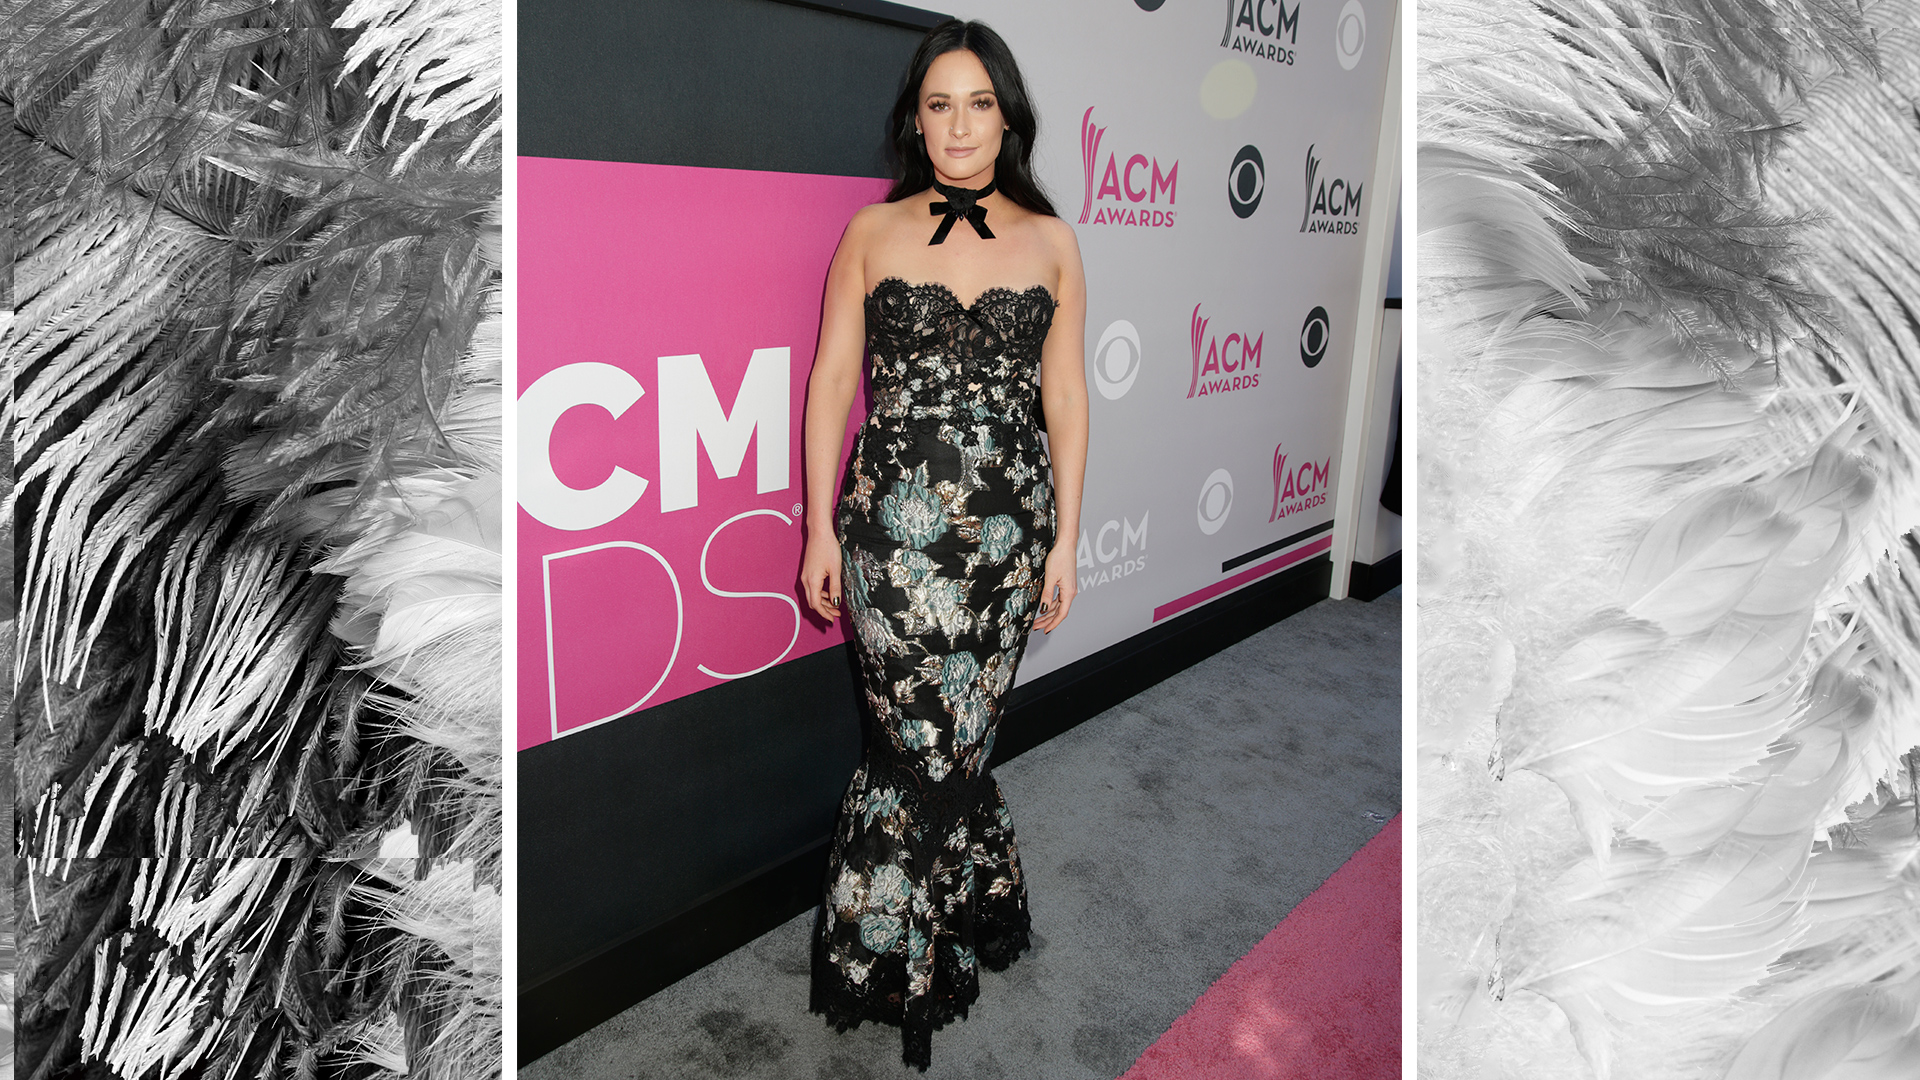 Kacey Musgraves poses on the red carpet in a gorgeous floral gown with lace accents.